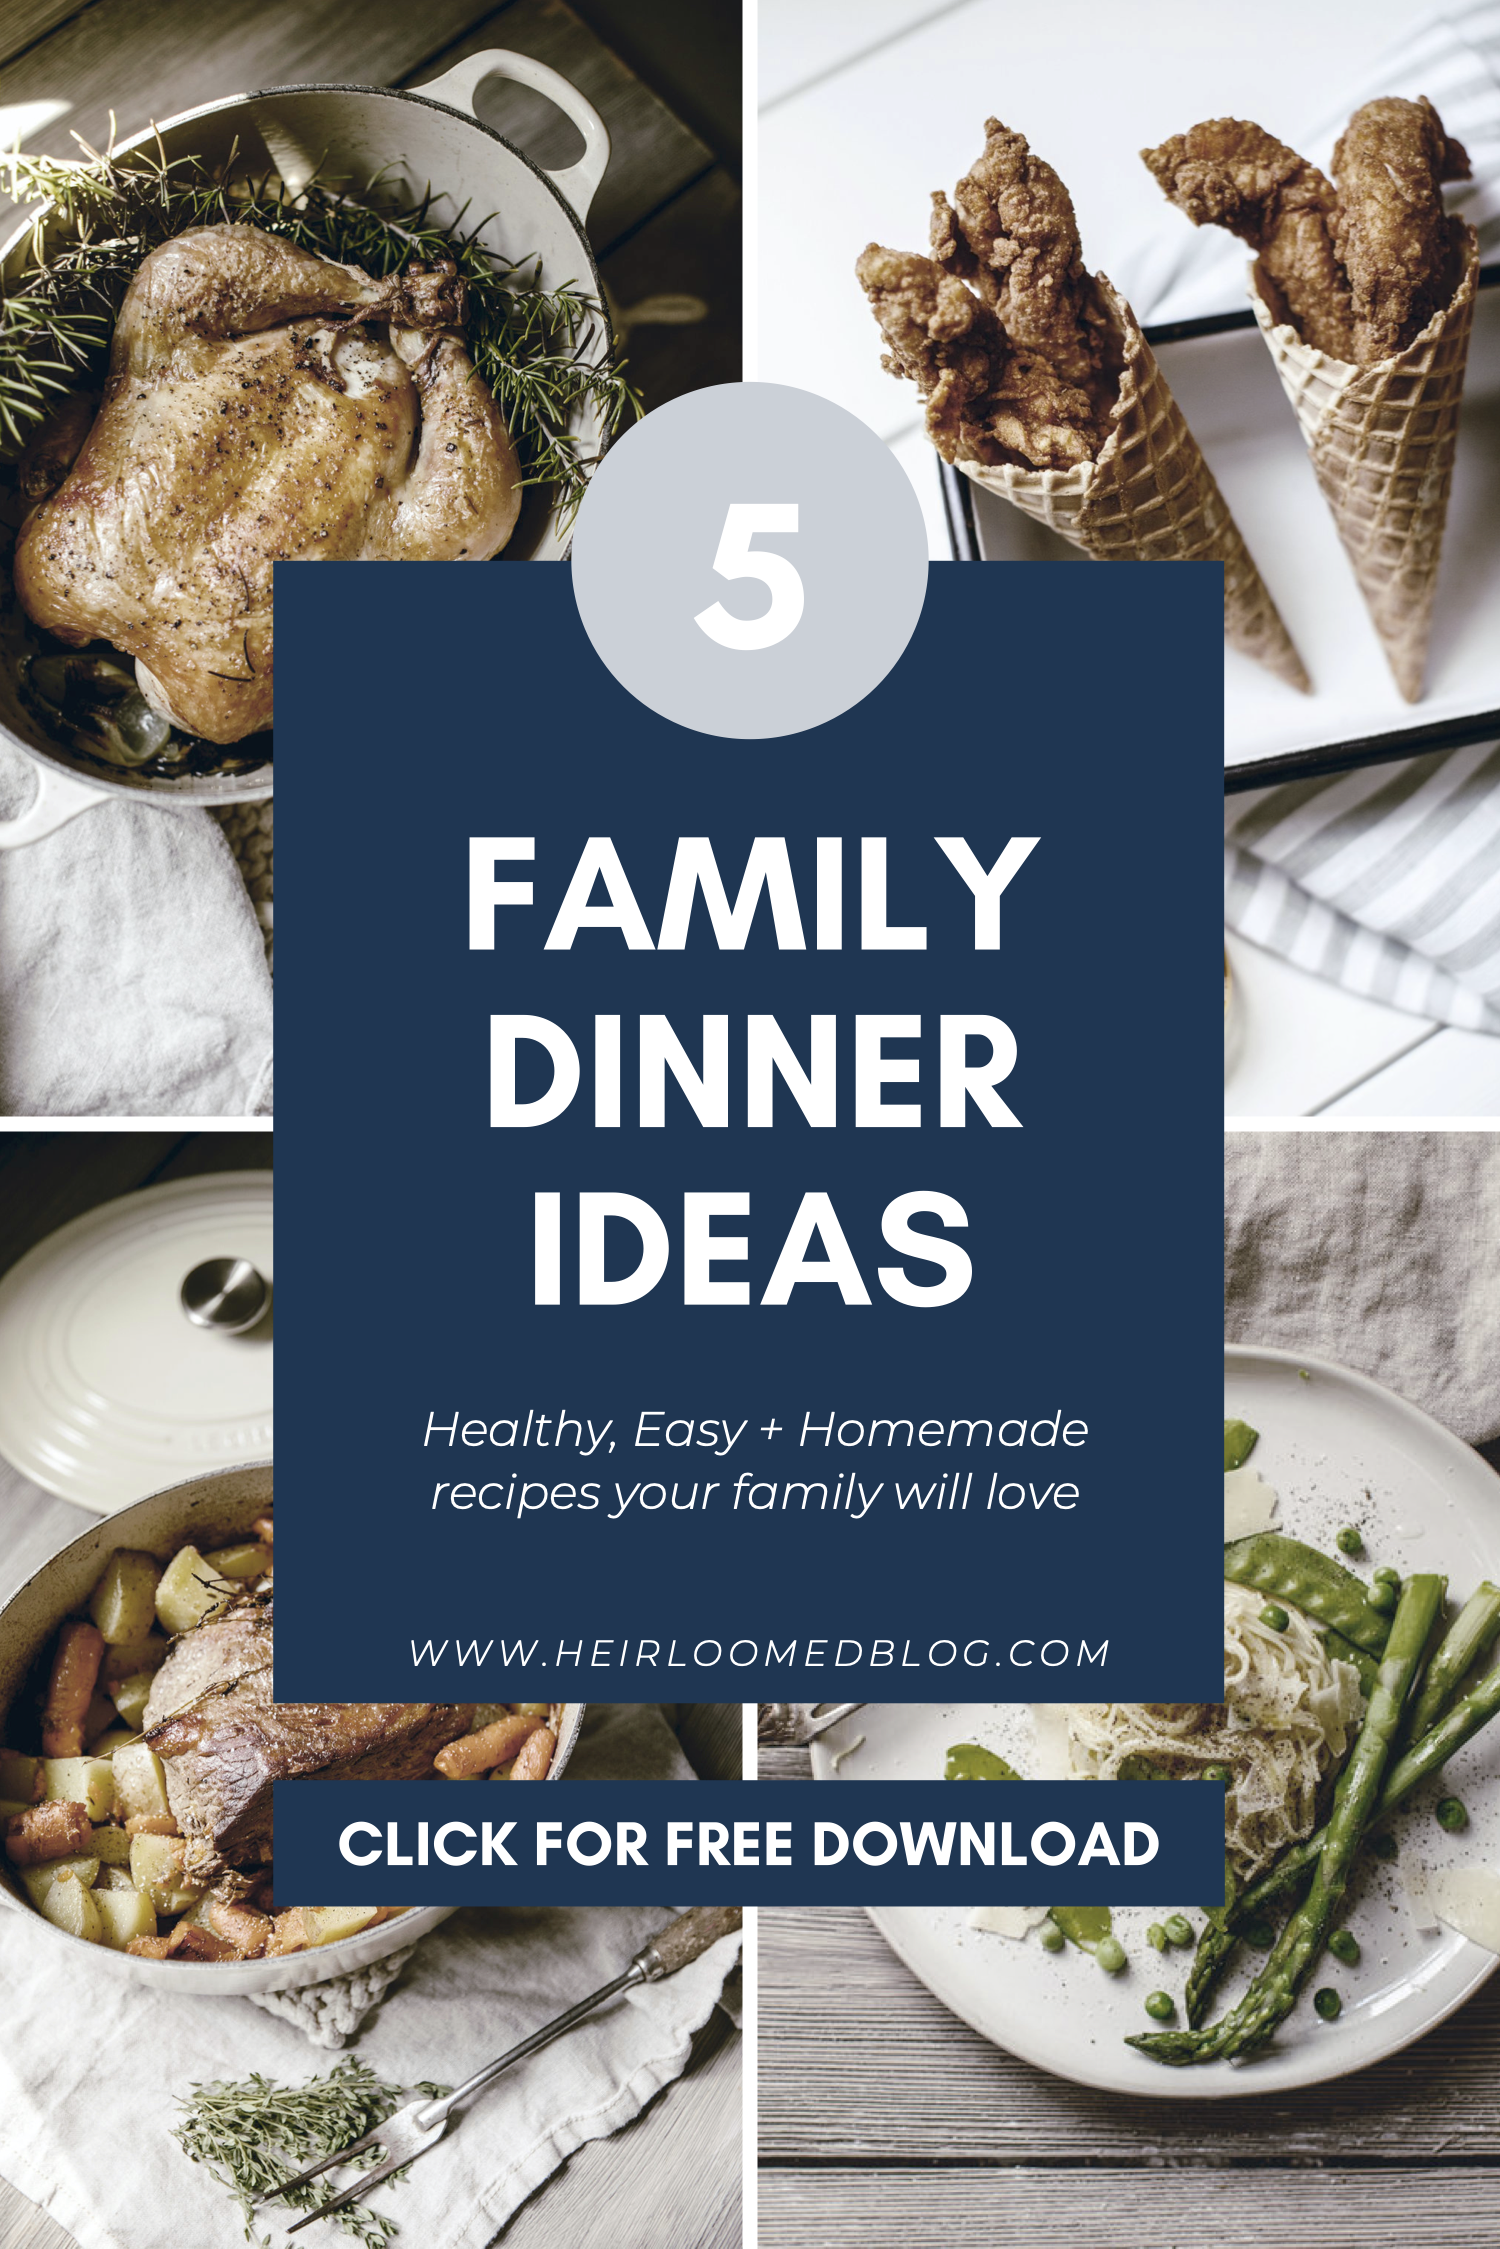 Easy Family Dinner Recipes - Free Download